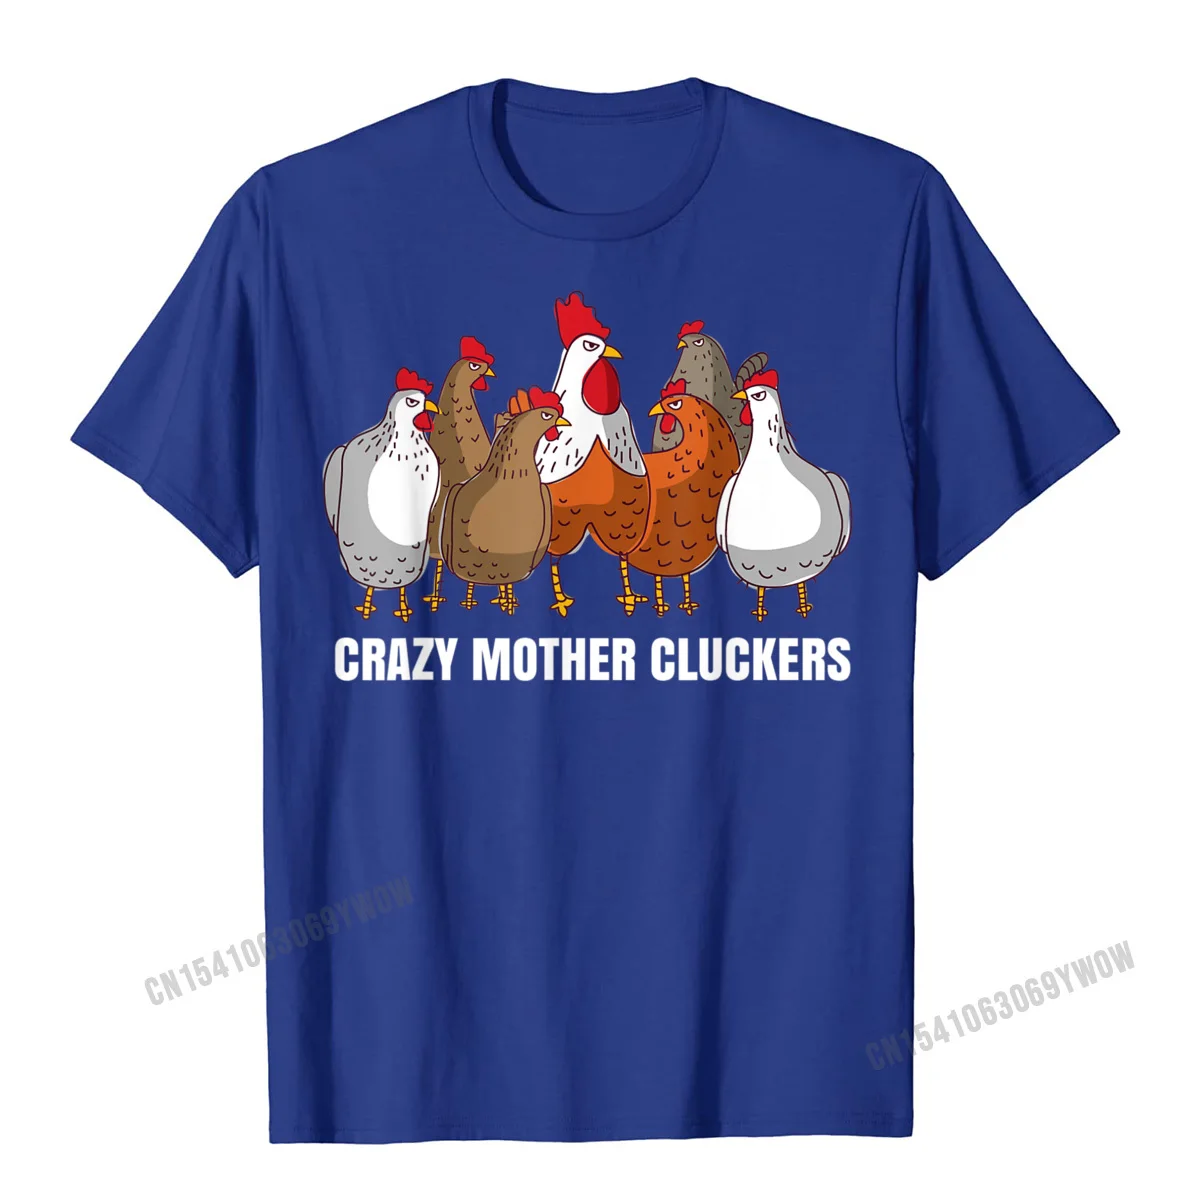 Europe Coupons Short Sleeve Normal T Shirts All Cotton O Neck Men Tops T Shirt Geek Tops & Tees Summer Fall Free Shipping Crazy Mother Cluckers Gift Chicken Shirts for Chicken Lovers T-Shirt__1222 blue